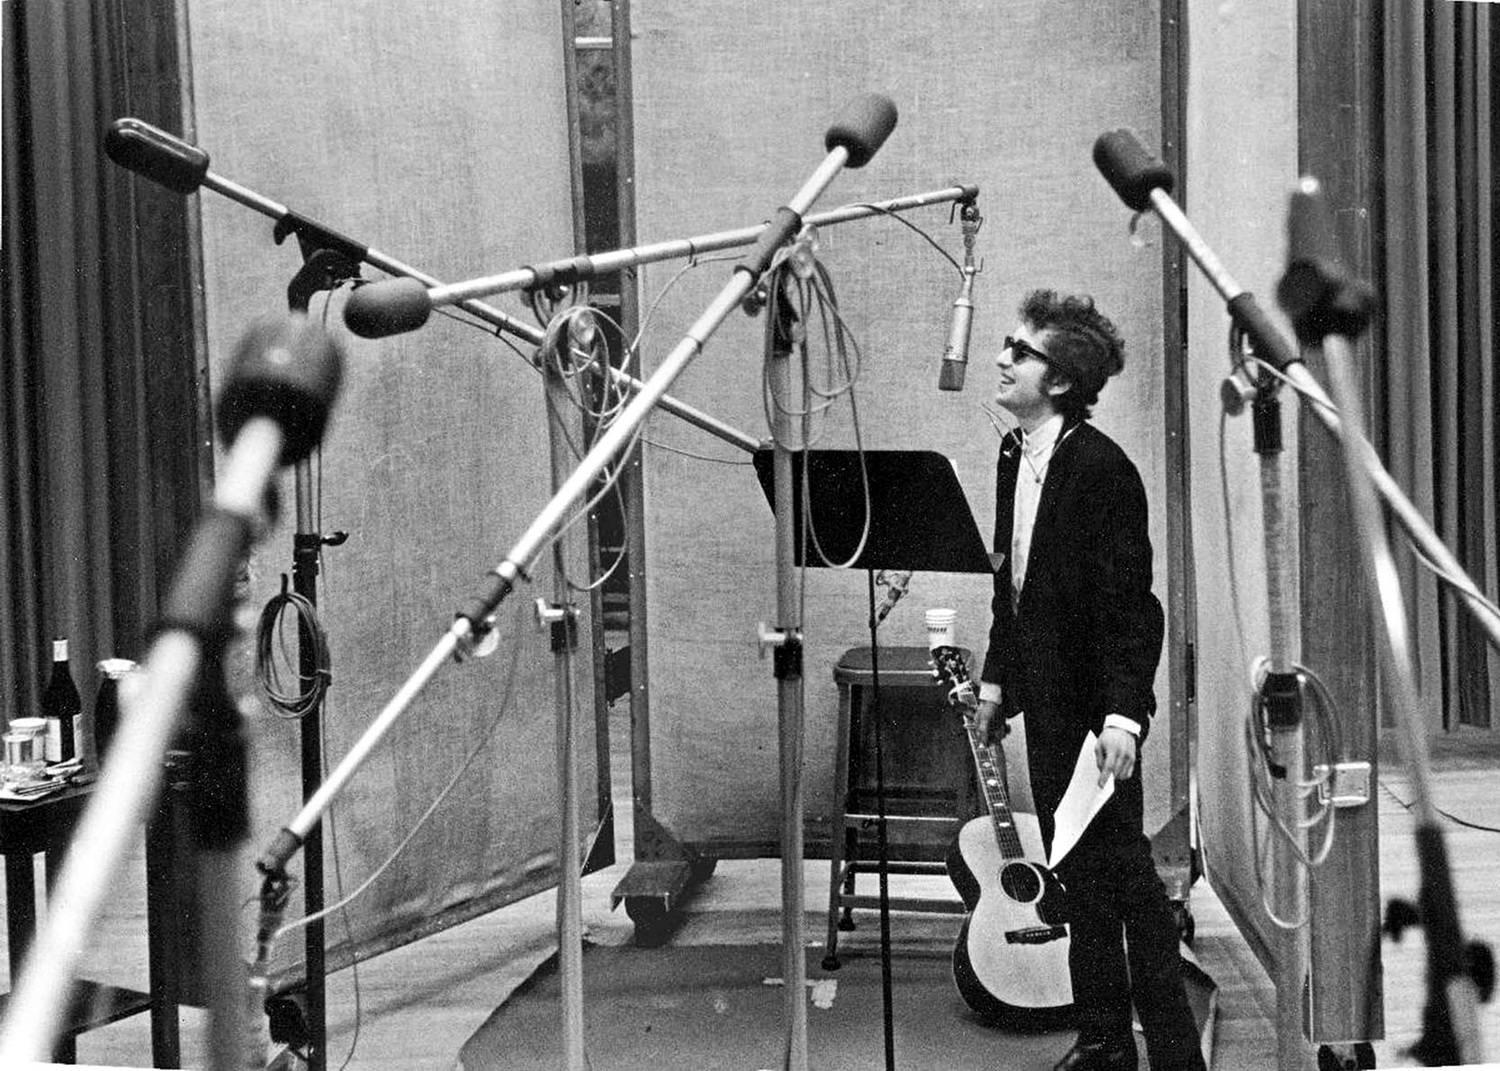 Daniel Kramer Black and White Photograph - Bob Dylan with Microphones